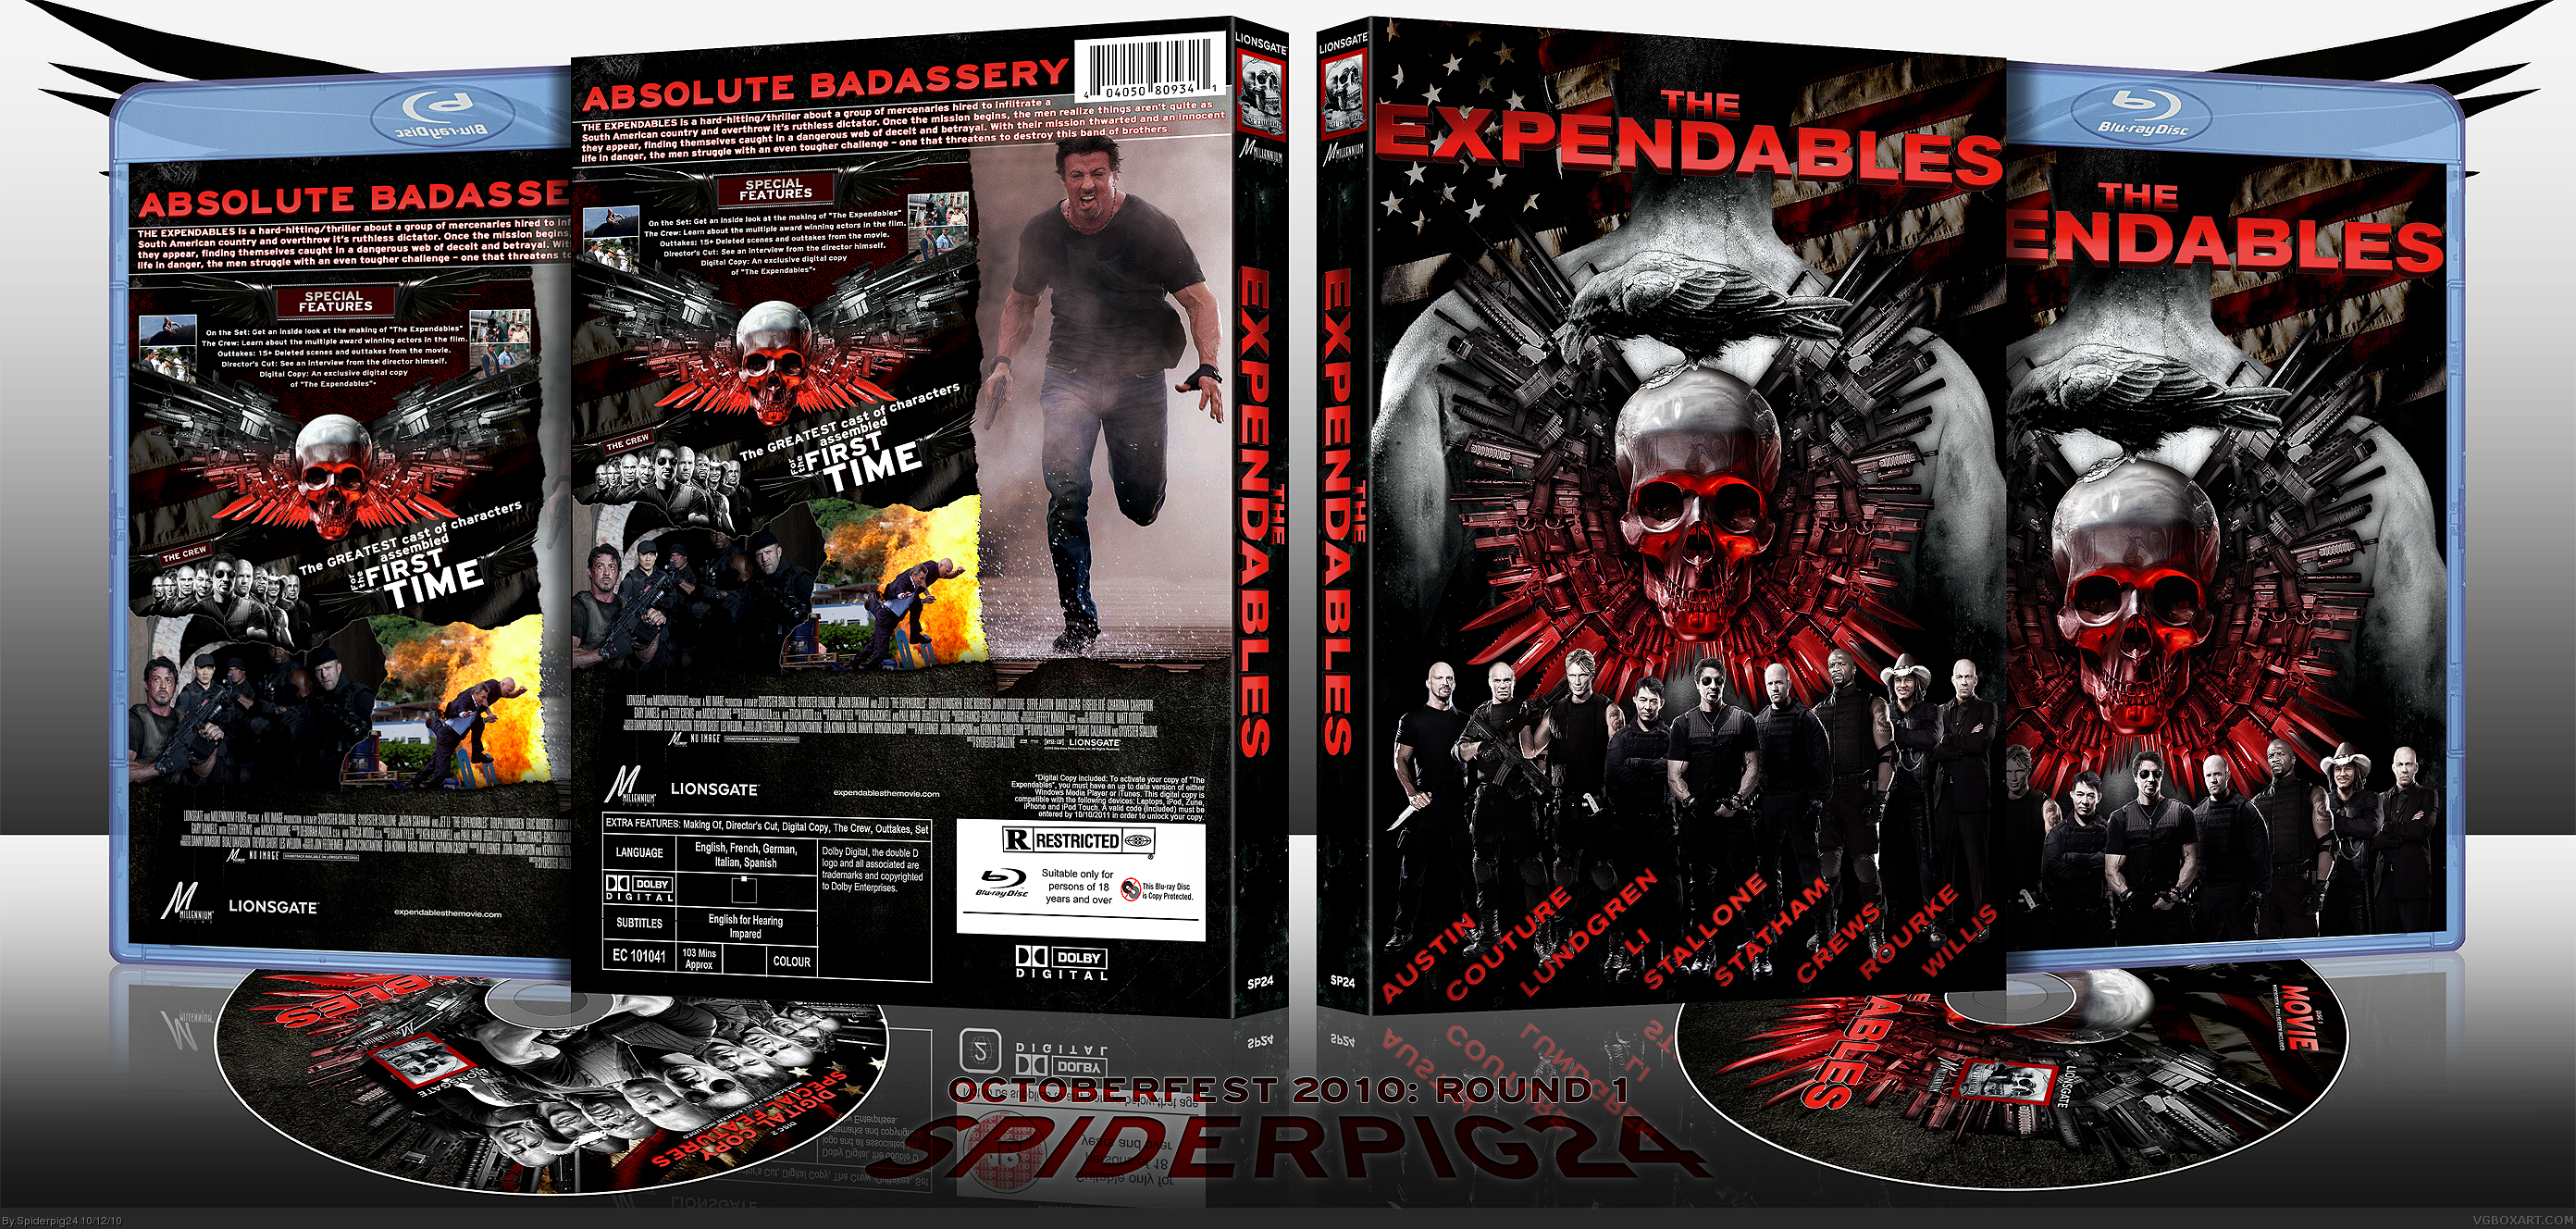 The Expendables box cover